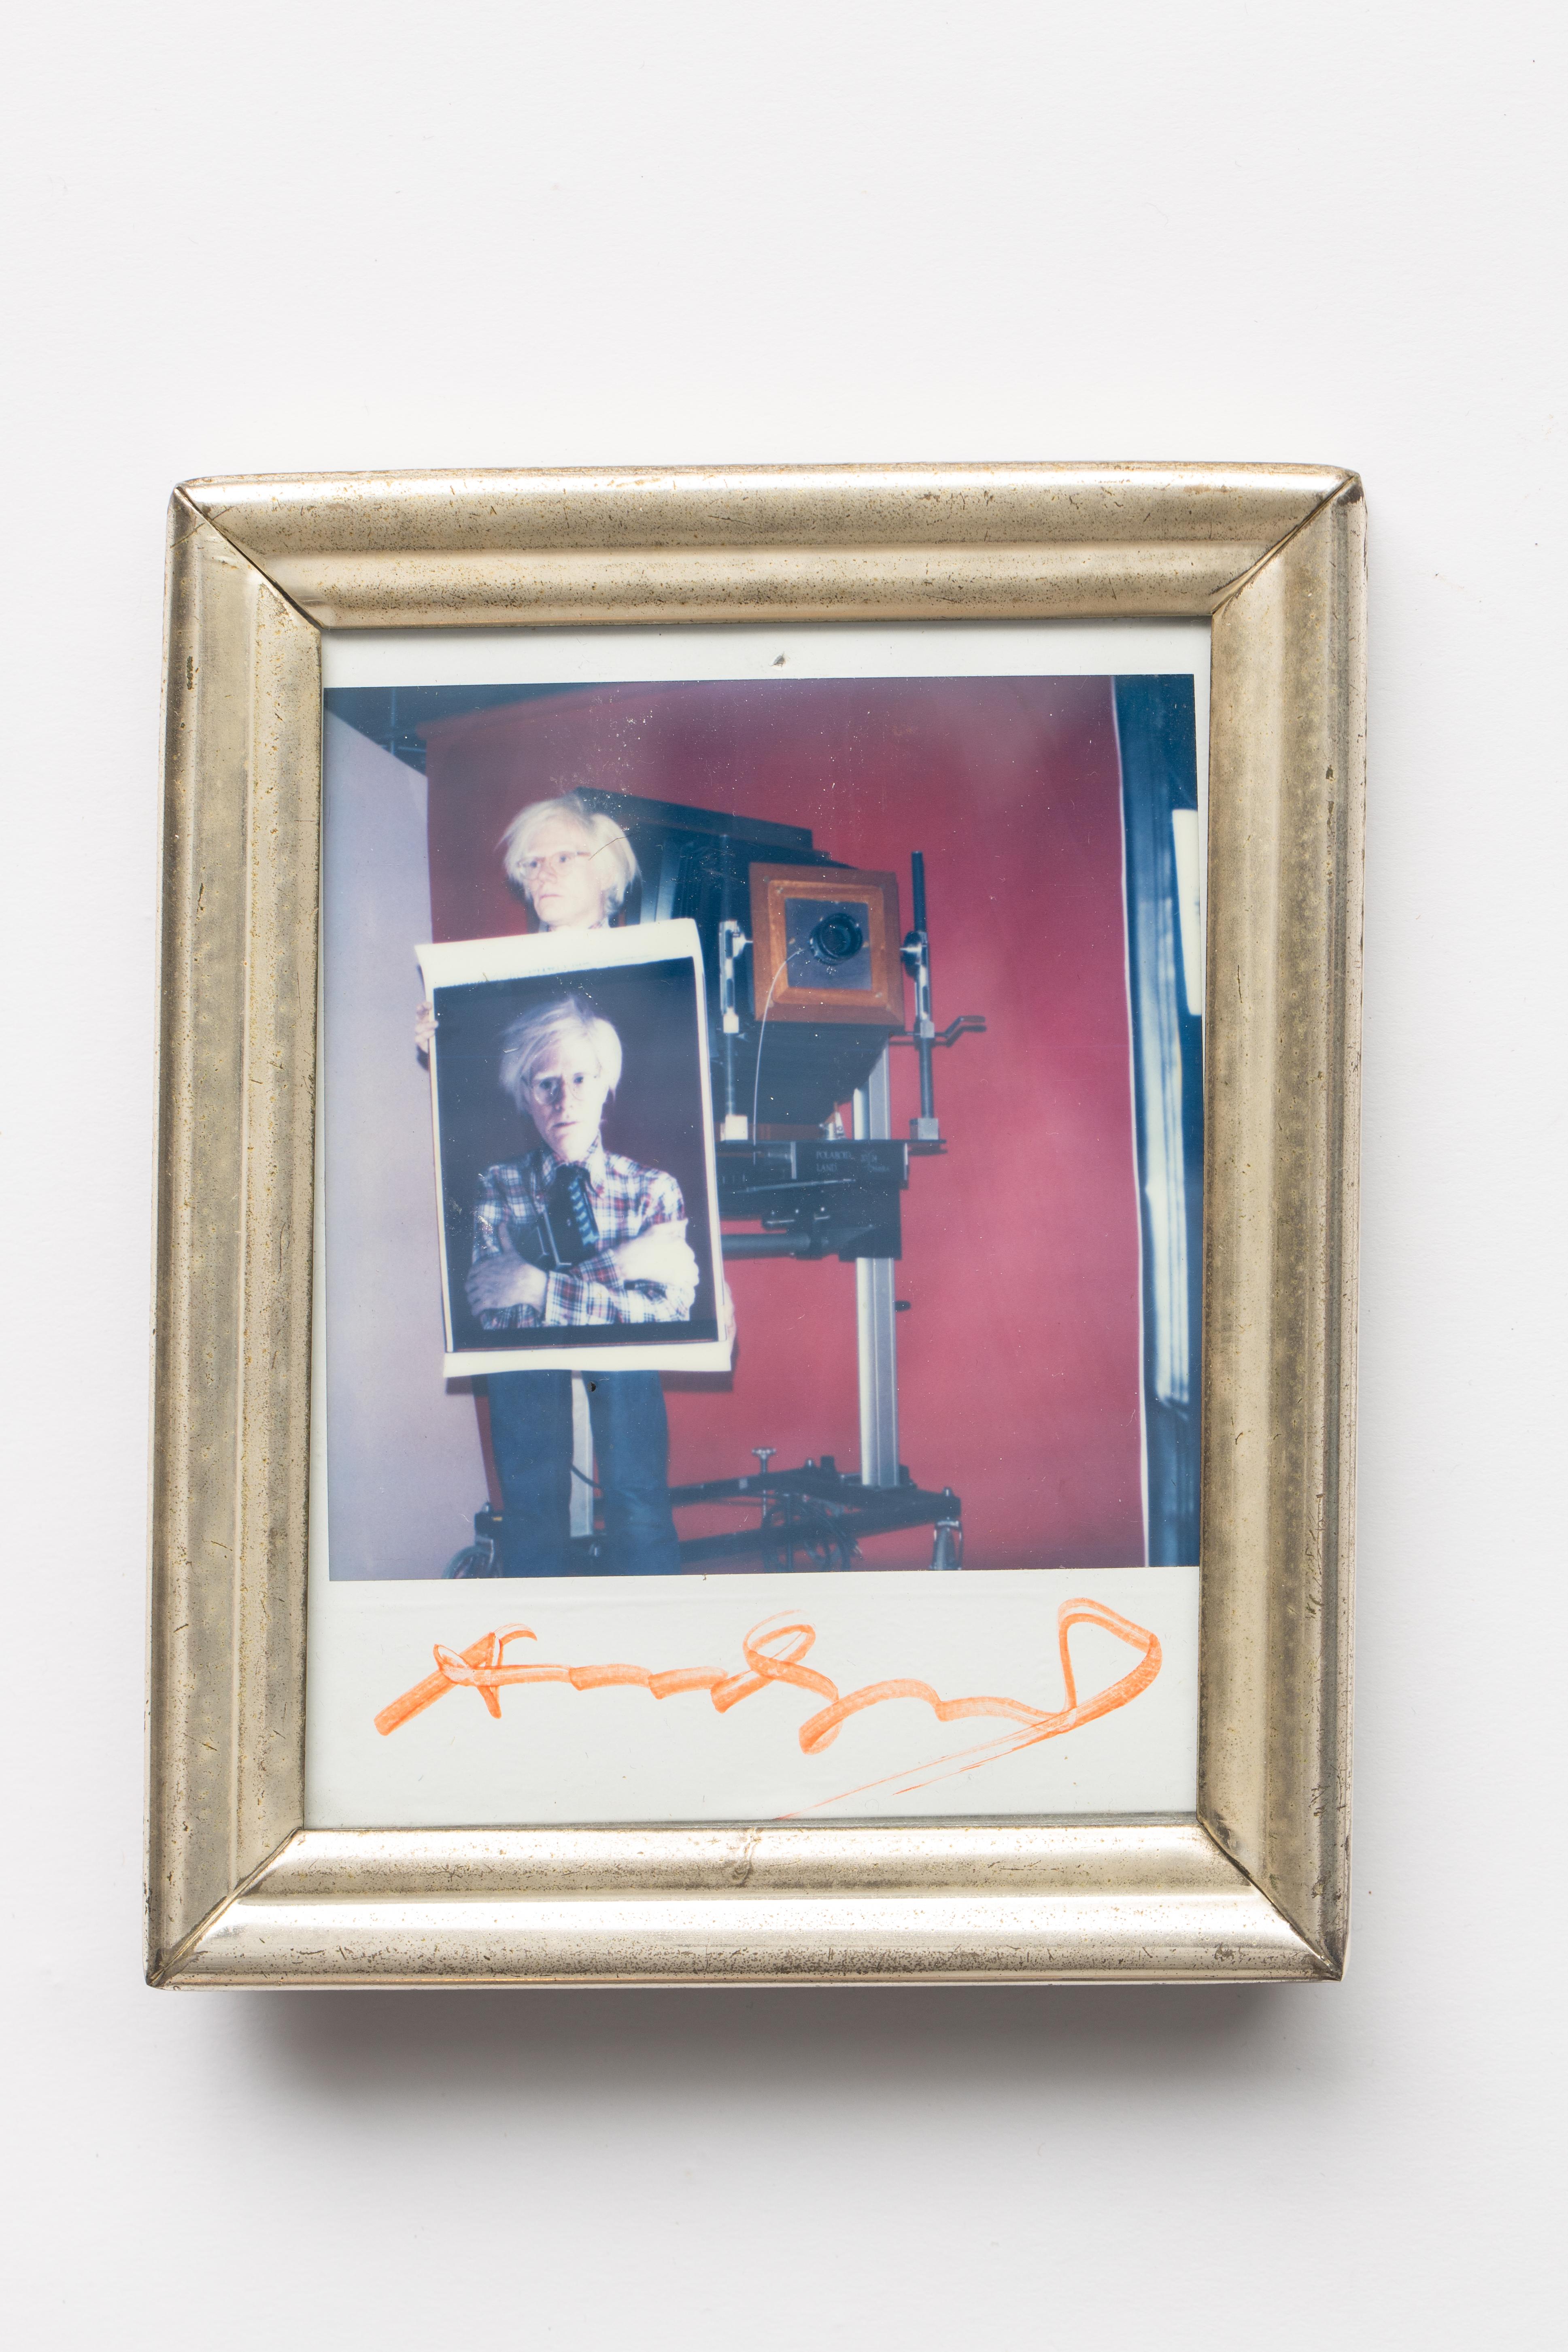 Bill Ray (1936-2020) polaroid photo of Andy Warhol holding a self-polaroid with 20 x 24 polaroid camera in background, circa 1980. The photo Andy is holding was minutes old, shot by Bill Ray for New York magazine with the 20 x 24 camera in